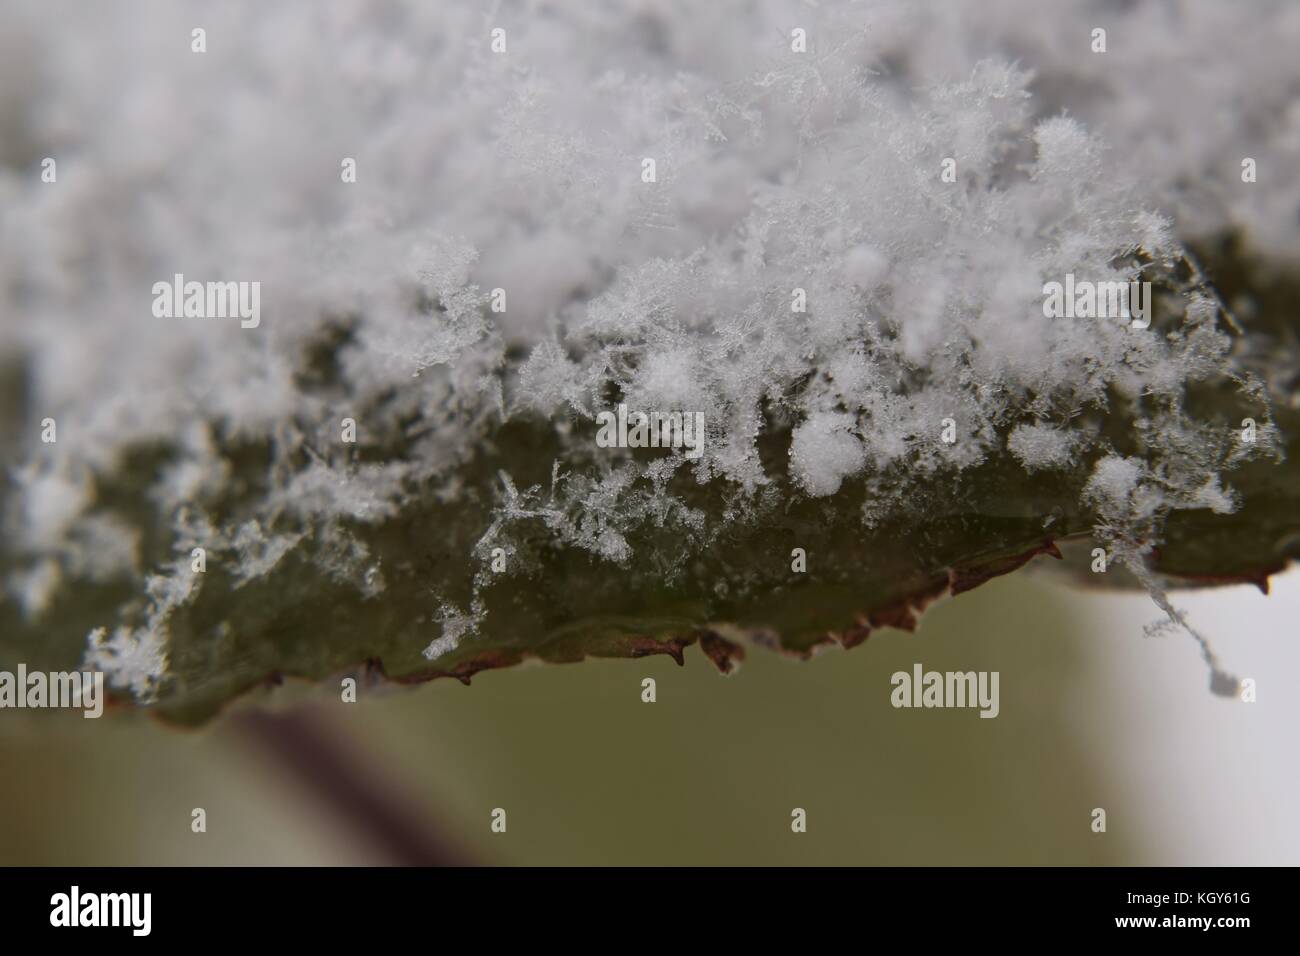 Close up of snowflakes on green leaf during early snowfall Stock Photo